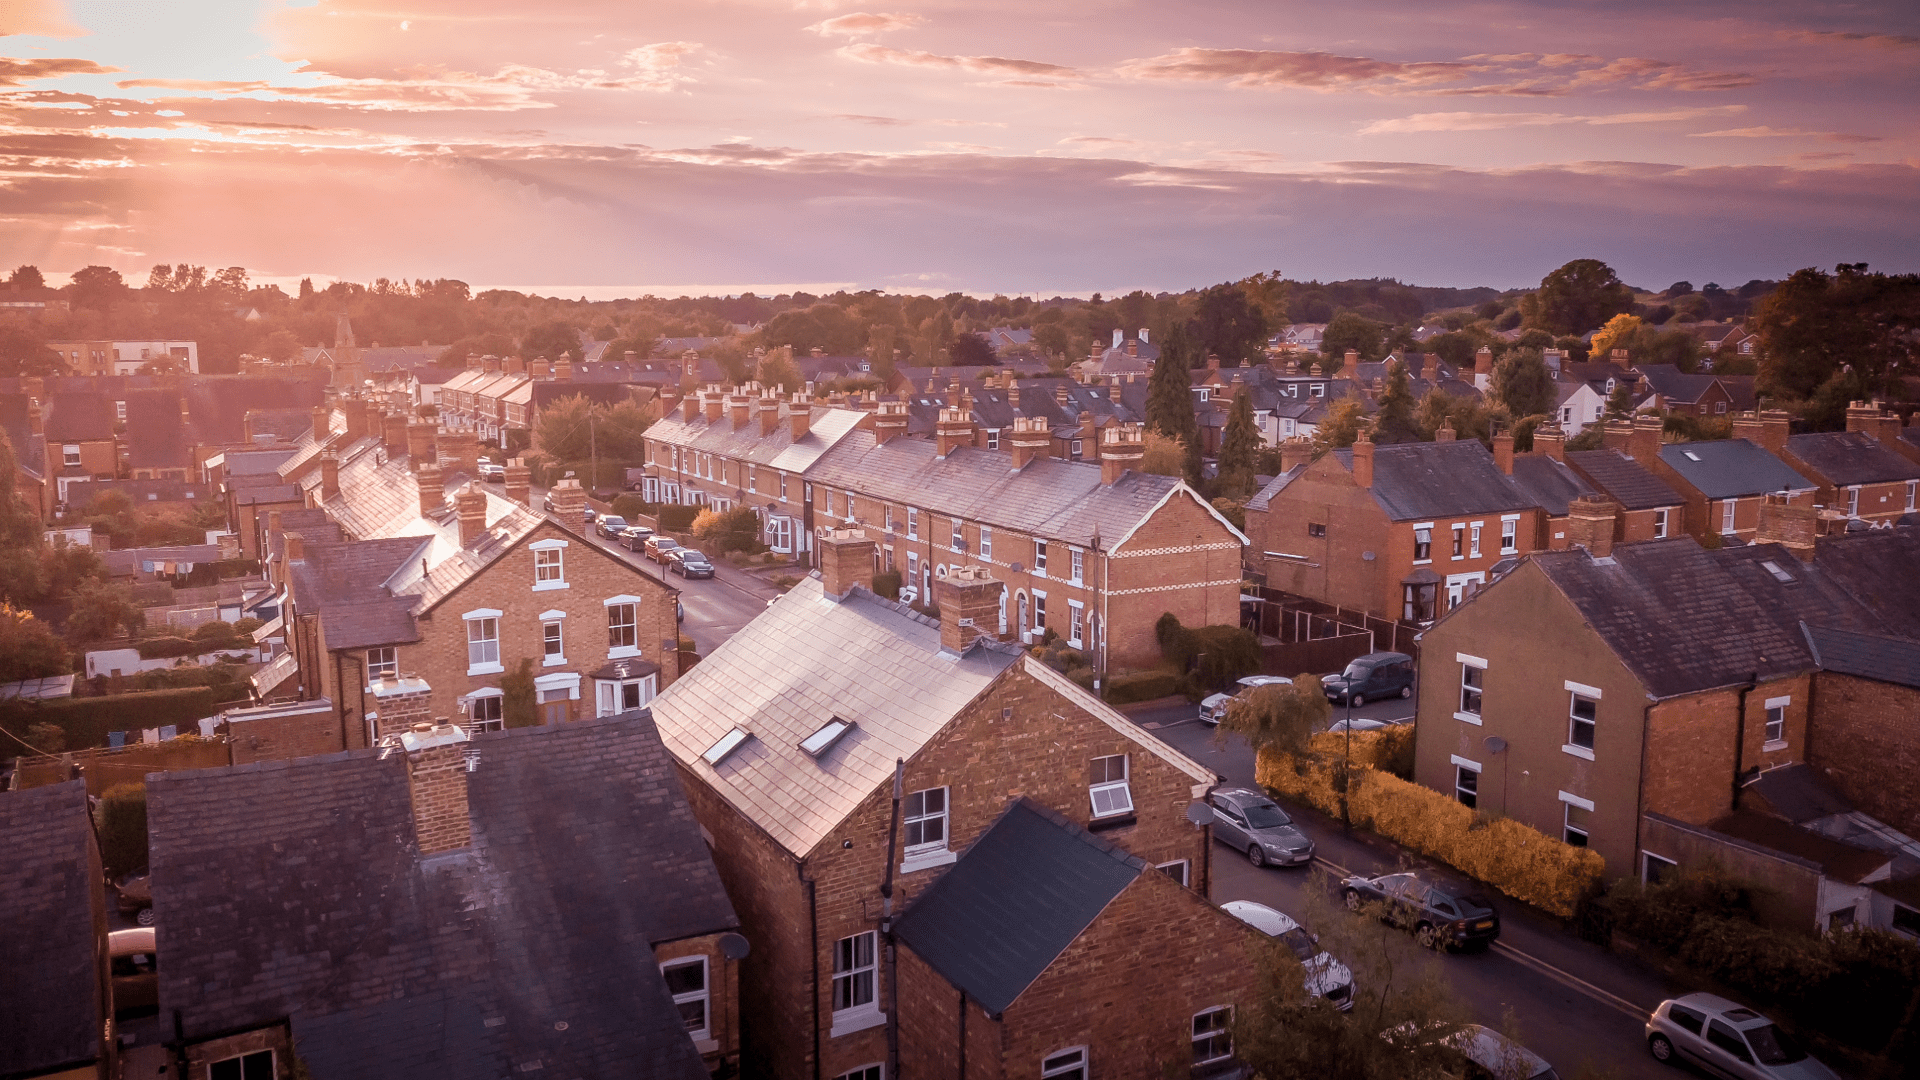 Aerial view of a residential area at sunset, featuring rows of brick houses with slanted roofs and chimneys, bathed in a soft golden light.